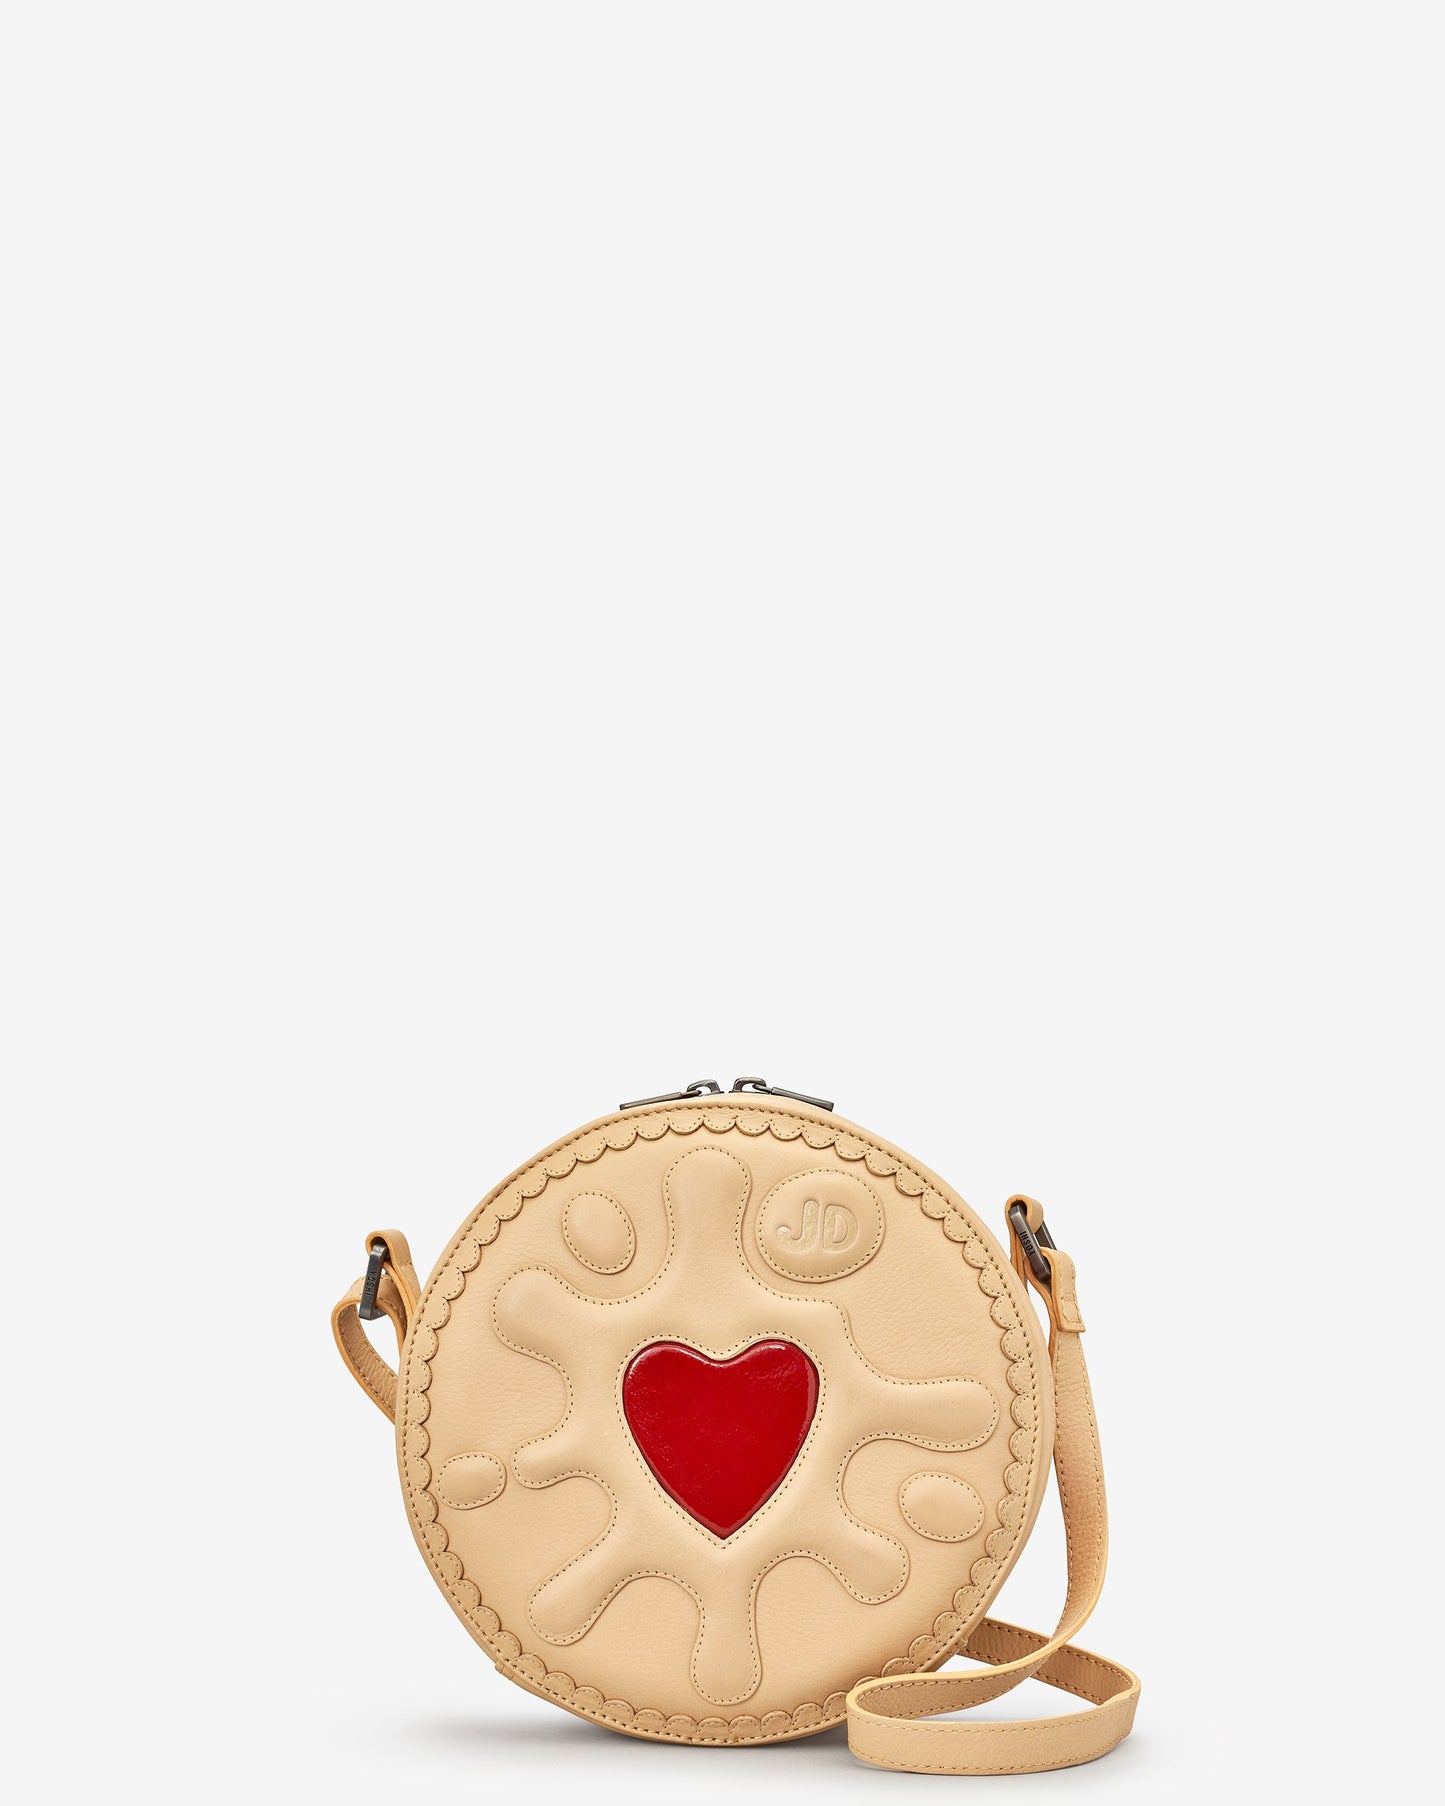 Yoshi Leather Jammy Dodger Biscuit Cross Body Bag